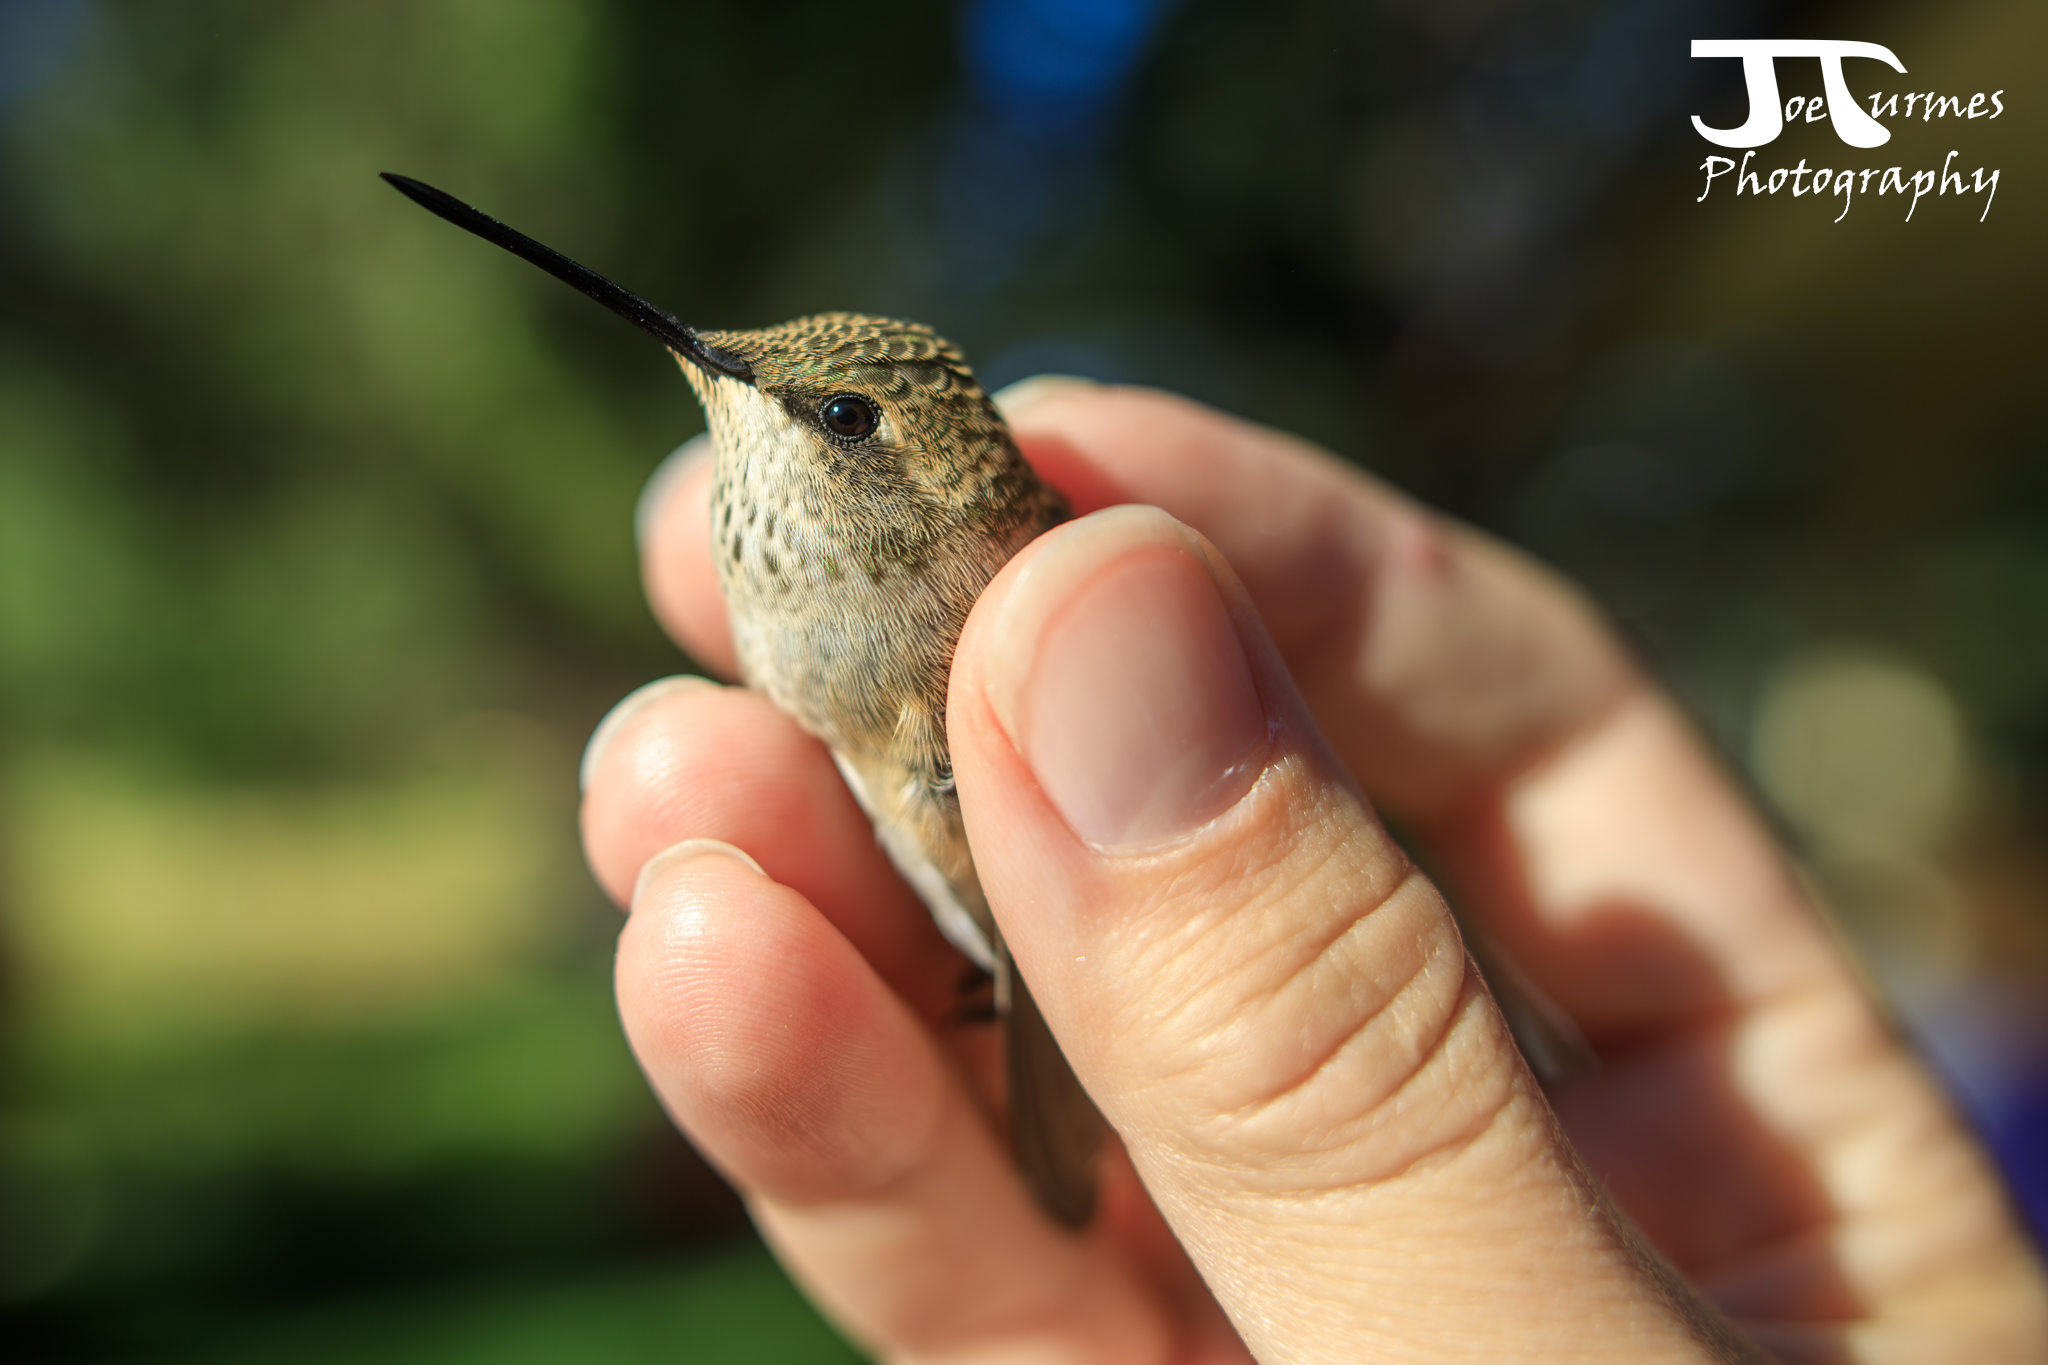 a small grayish hummingbird looks with curiosity at the camera. He is held gently between the thumb and forefinger of a biologist. His head is about the size of the biologist's thumbnail